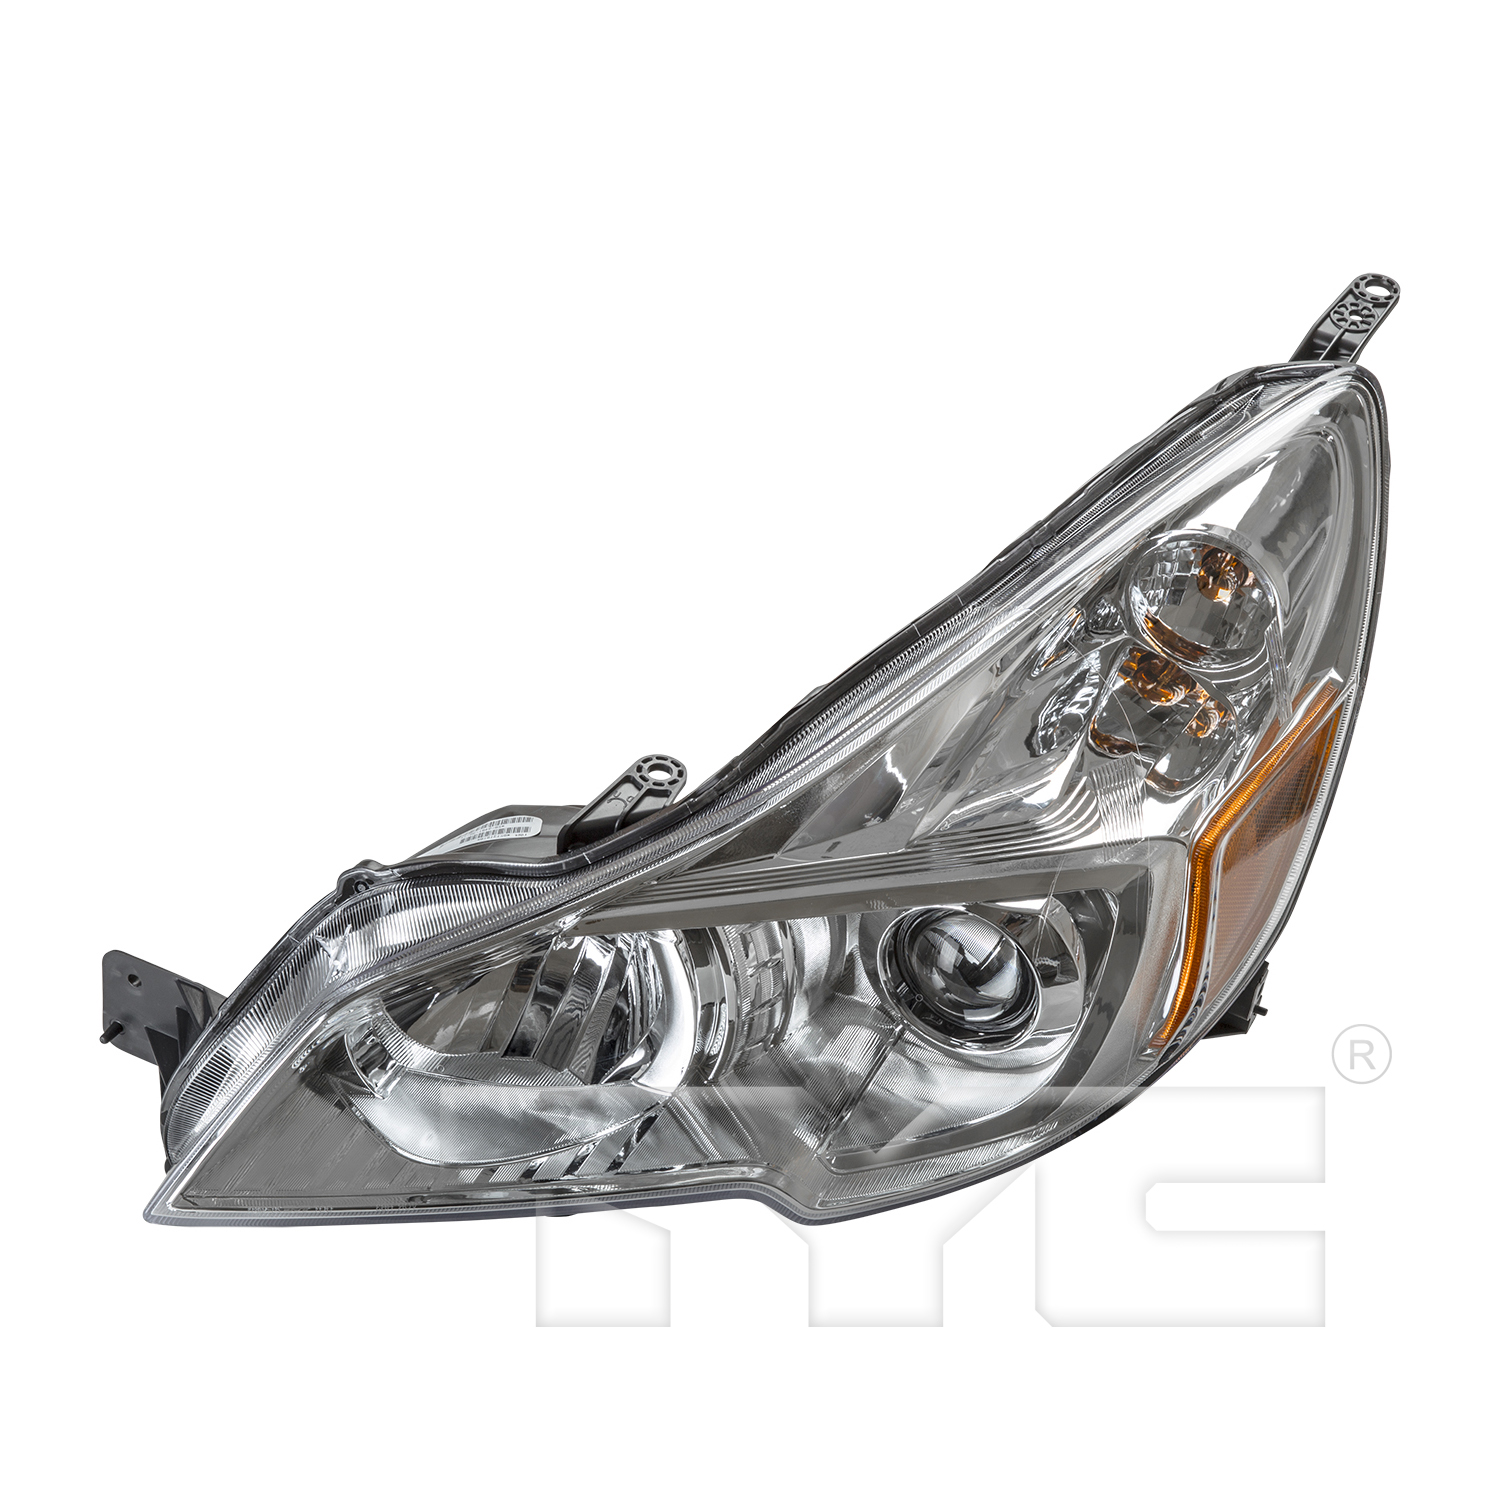 Aftermarket HEADLIGHTS for SUBARU - OUTBACK, OUTBACK,13-14,LT Headlamp assy composite